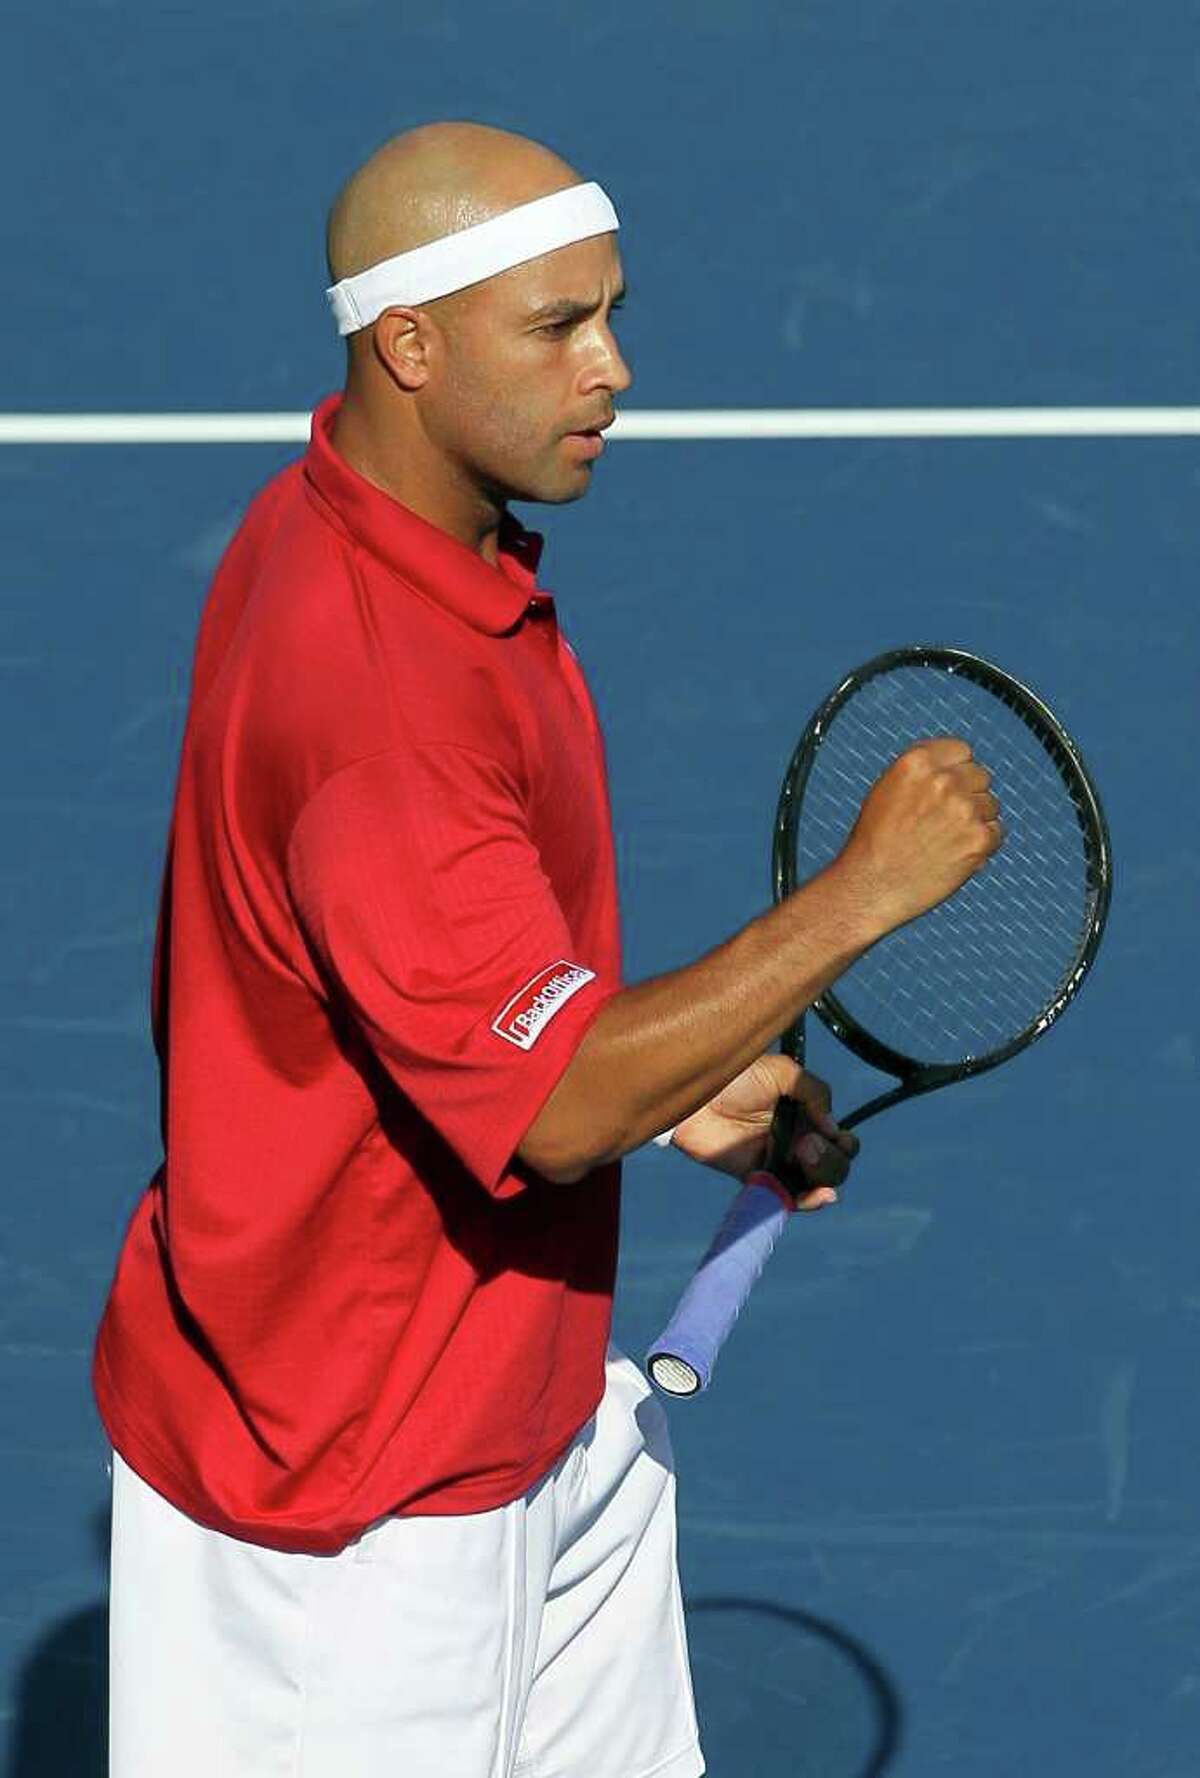 LOS ANGELES, CA - JULY 27: James Blake pumps his fist following his victory over Leonardo Mayer of Argentina during the Farmers Classic at the Los Angeles Tennis Center - UCLA on July 27, 2010 in Los Angeles, California. (Photo by Jeff Gross/Getty Images) *** Local Caption *** James Blake